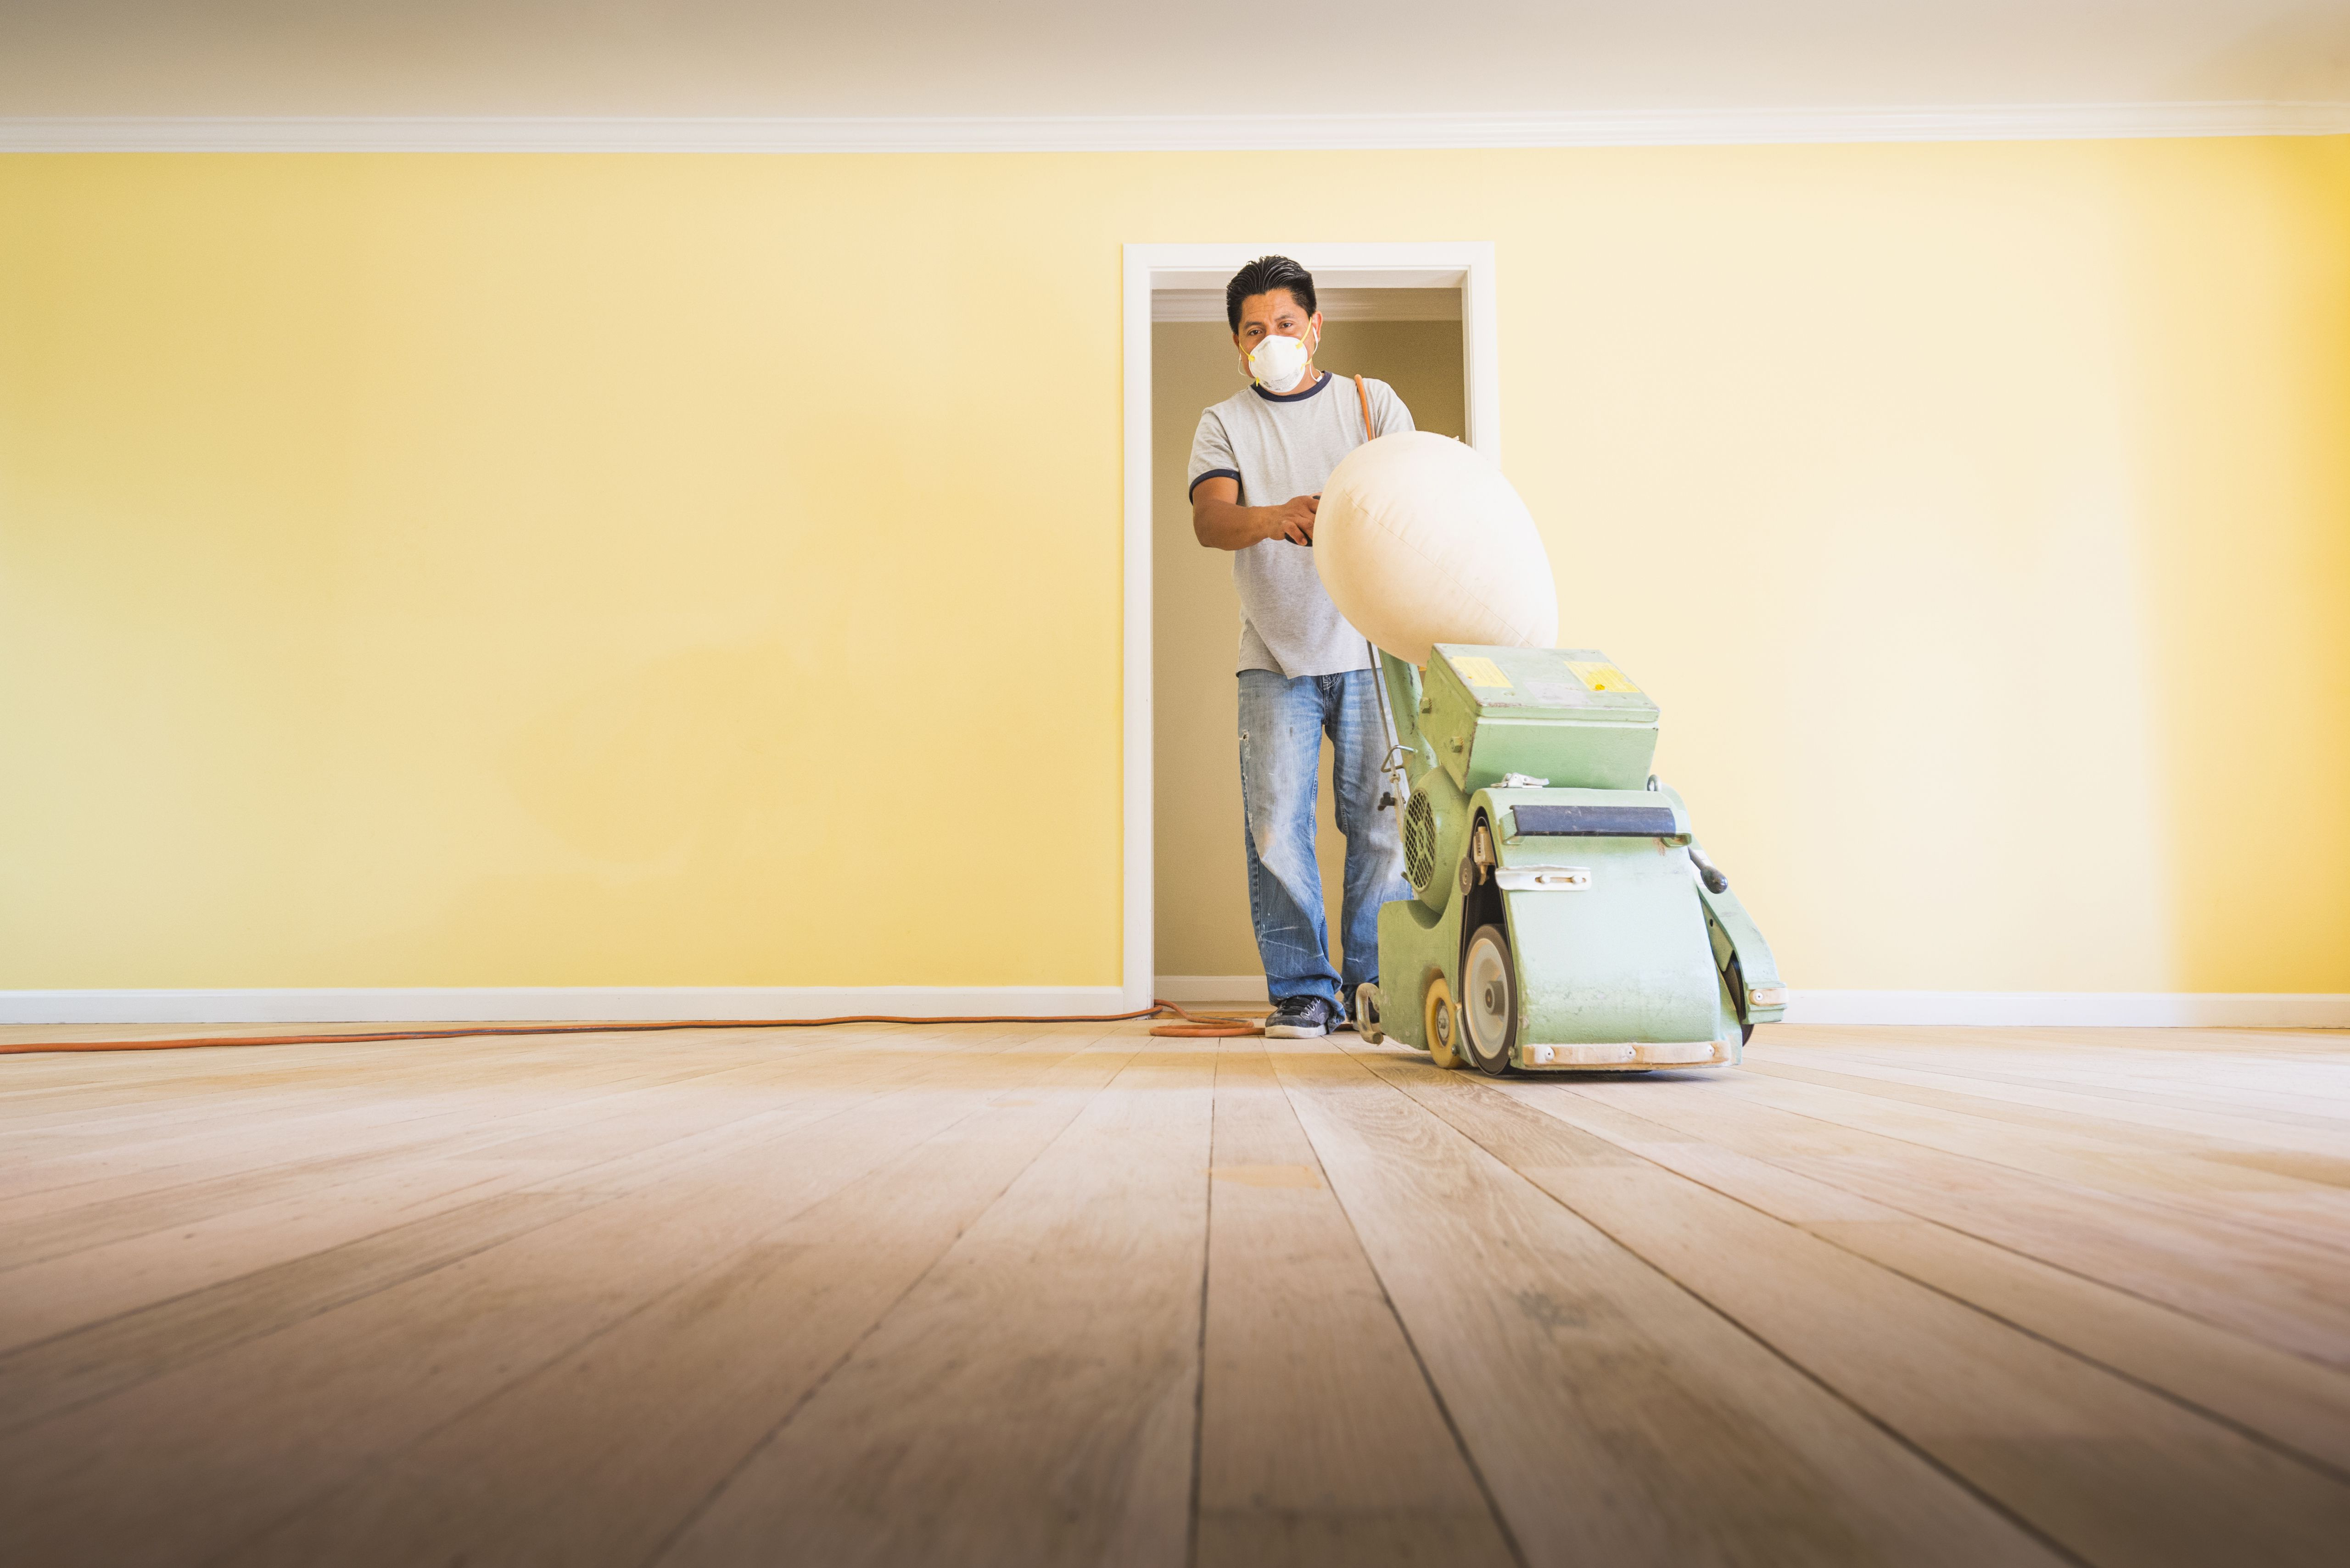 27 attractive How Difficult is It to Refinish Hardwood Floors 2023 free download how difficult is it to refinish hardwood floors of should you paint walls or refinish floors first pertaining to floorsandingafterpainting 5a8f08dfae9ab80037d9d878